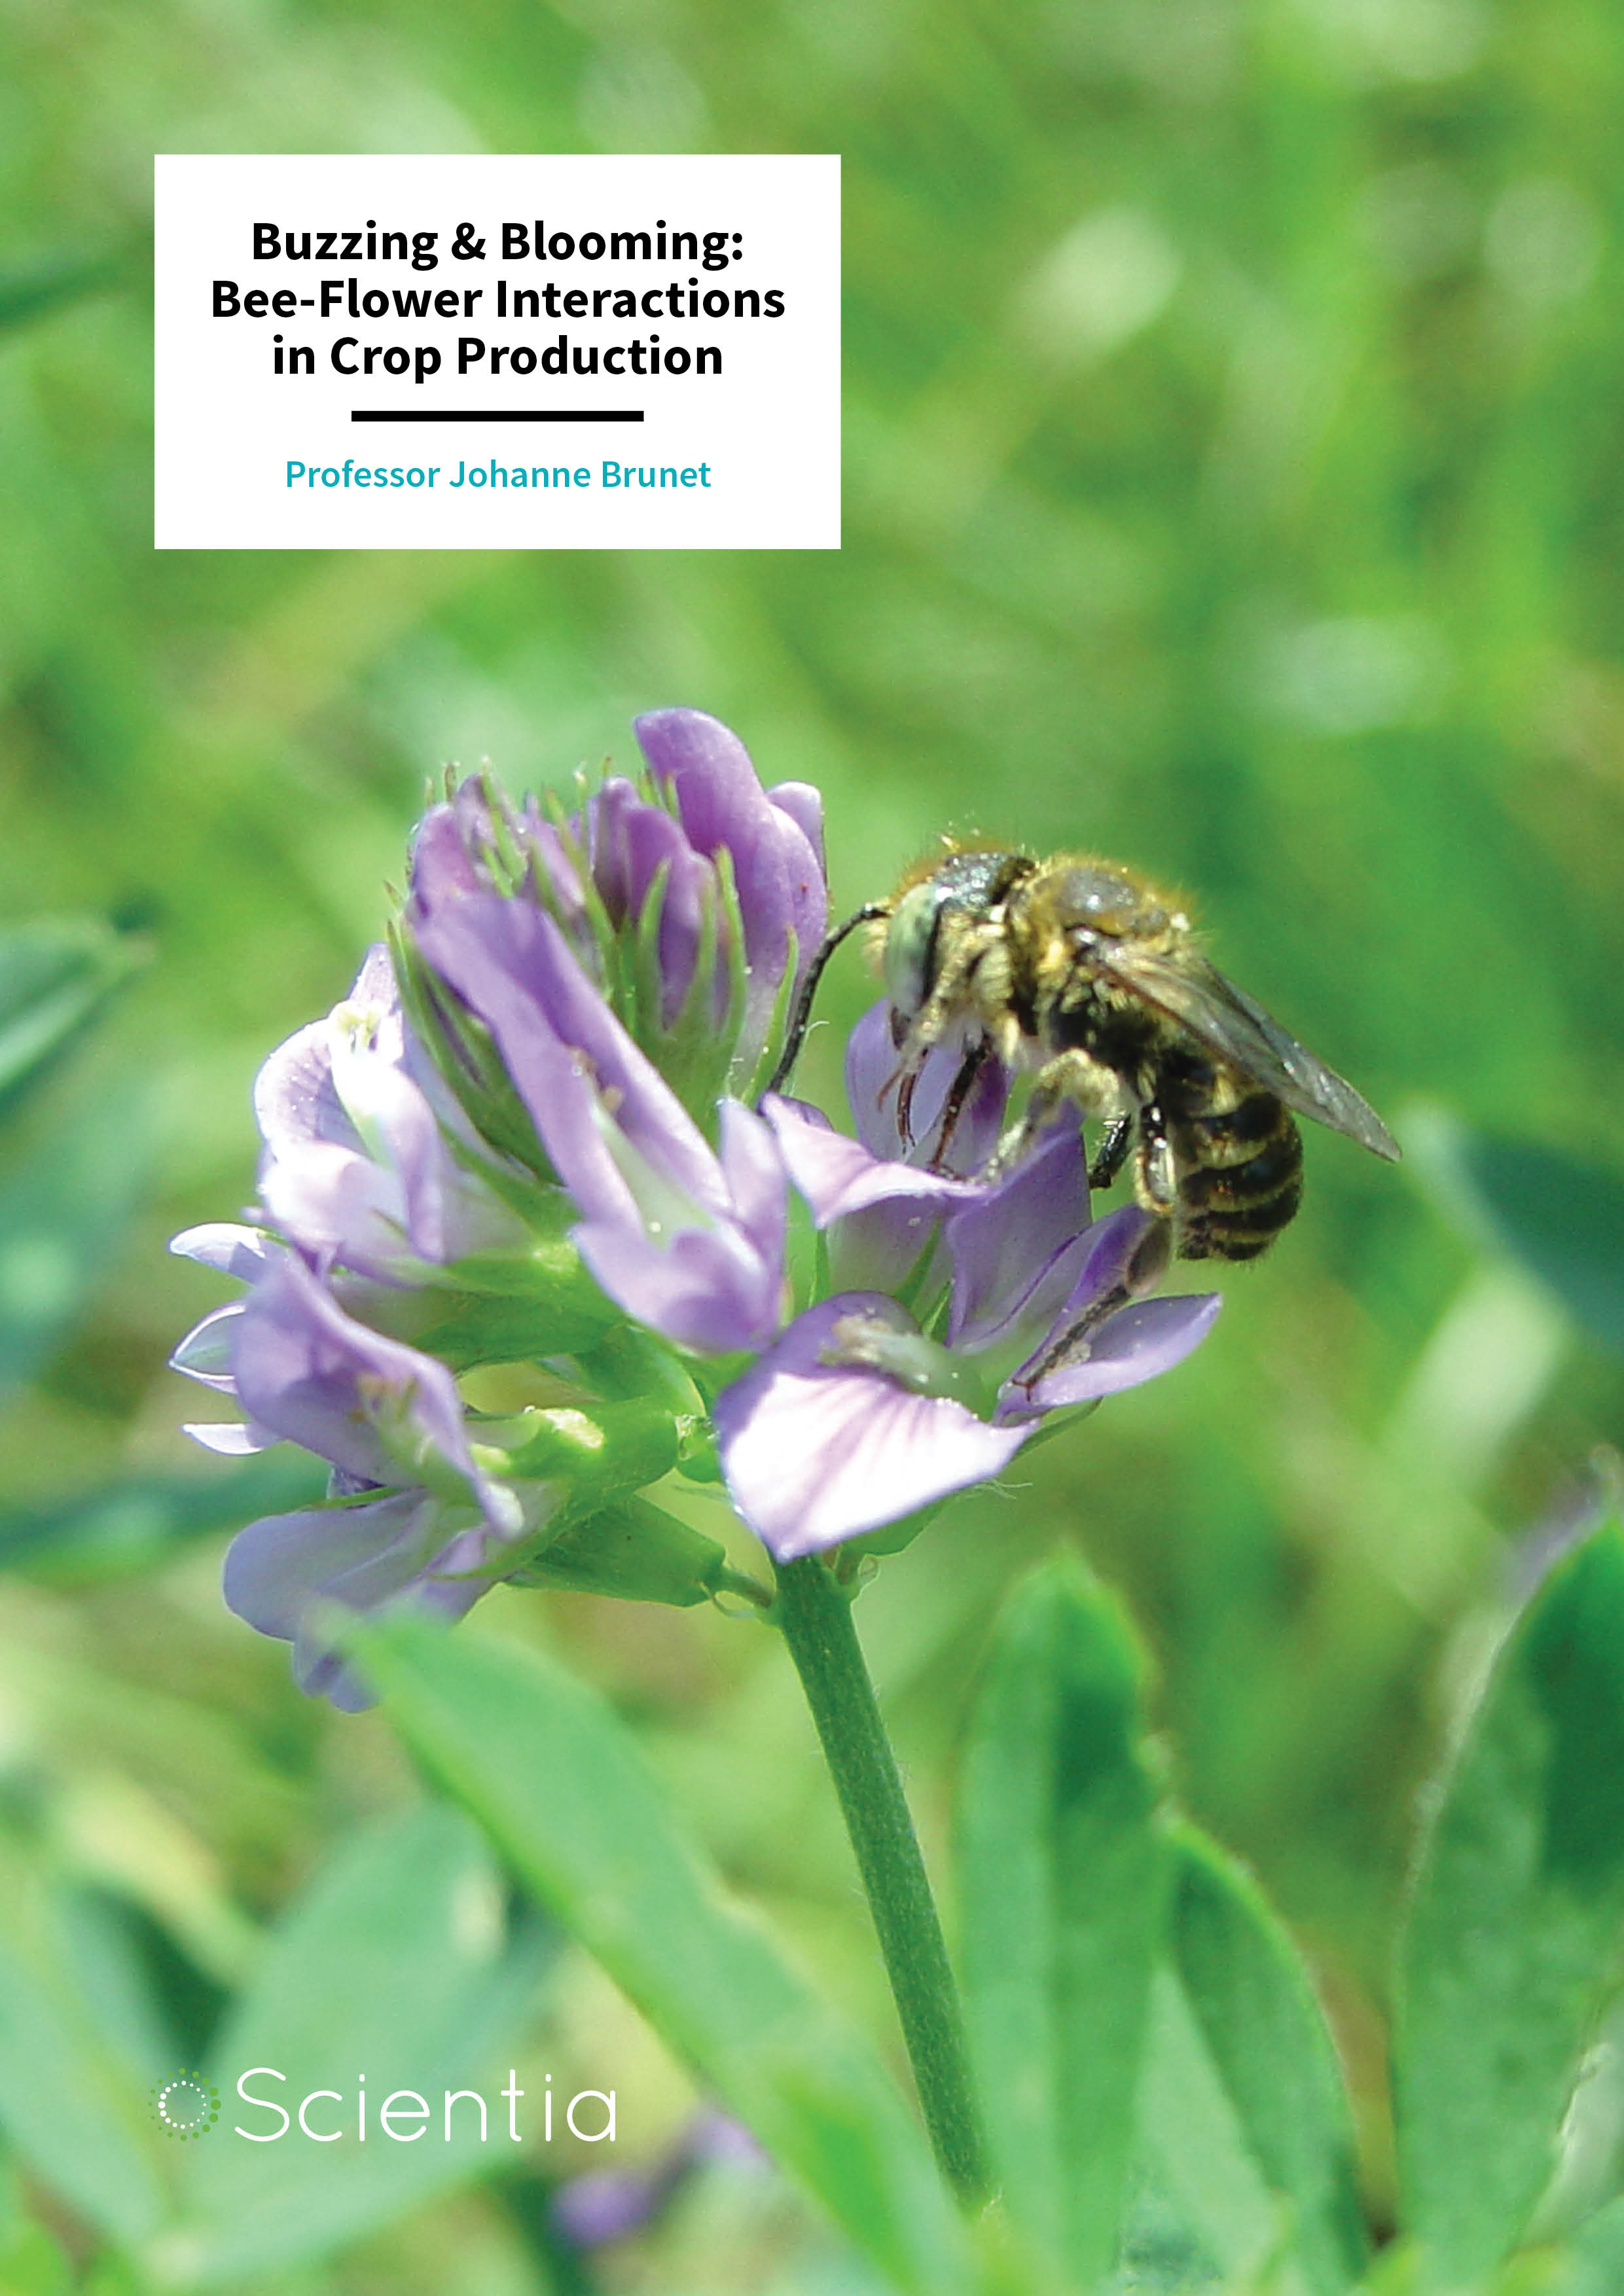 Dr Johanne Brunet – Buzzing & Blooming: Bee-Flower Interactions in Crop Production